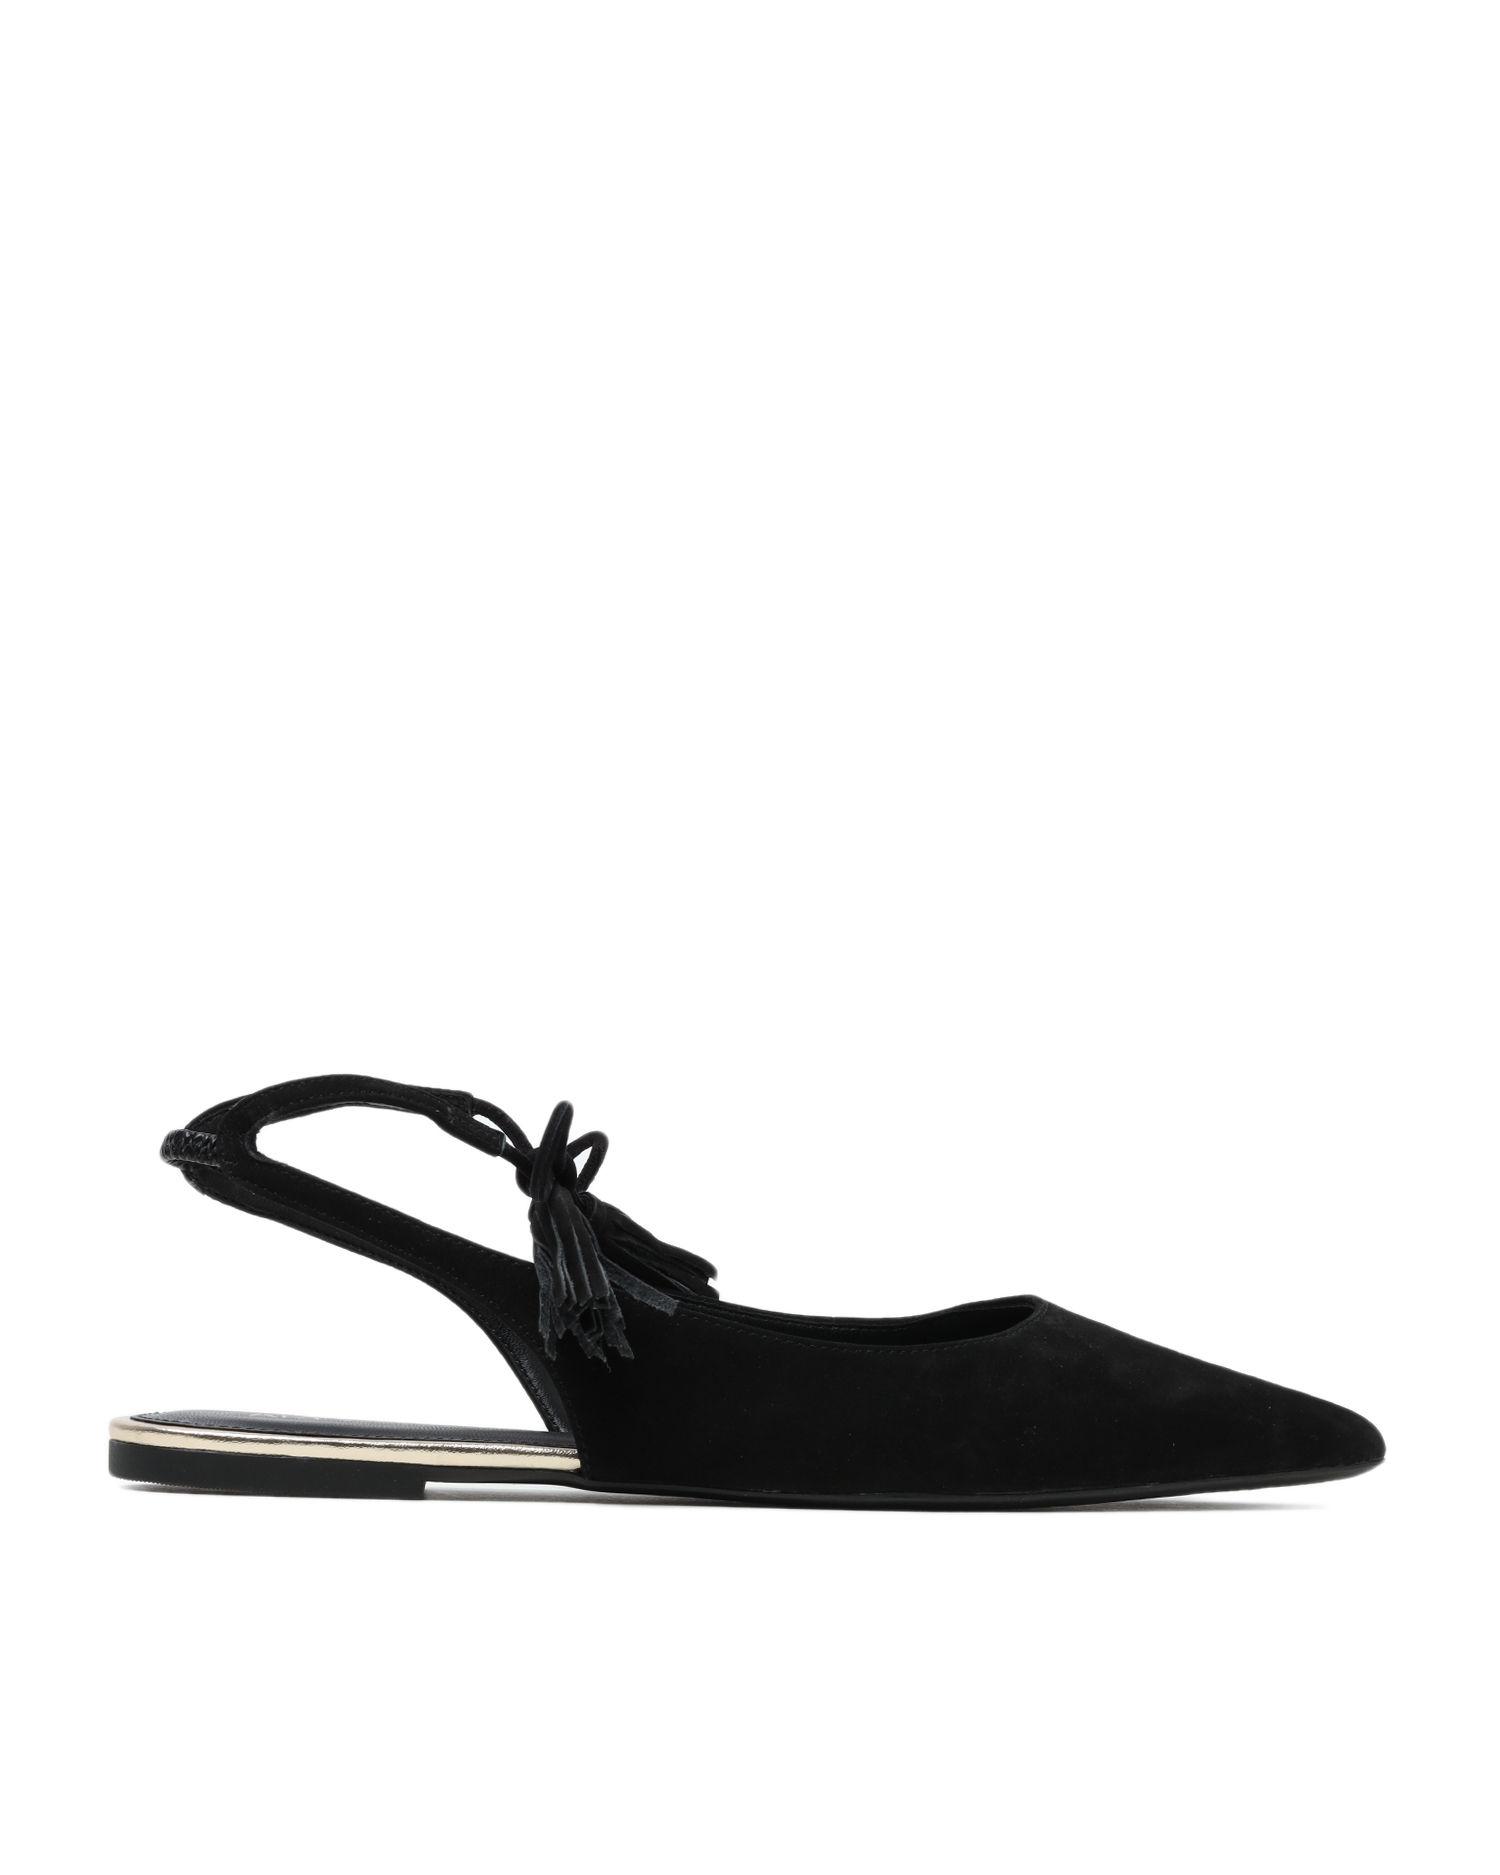 Laced pump flats by AREZZO